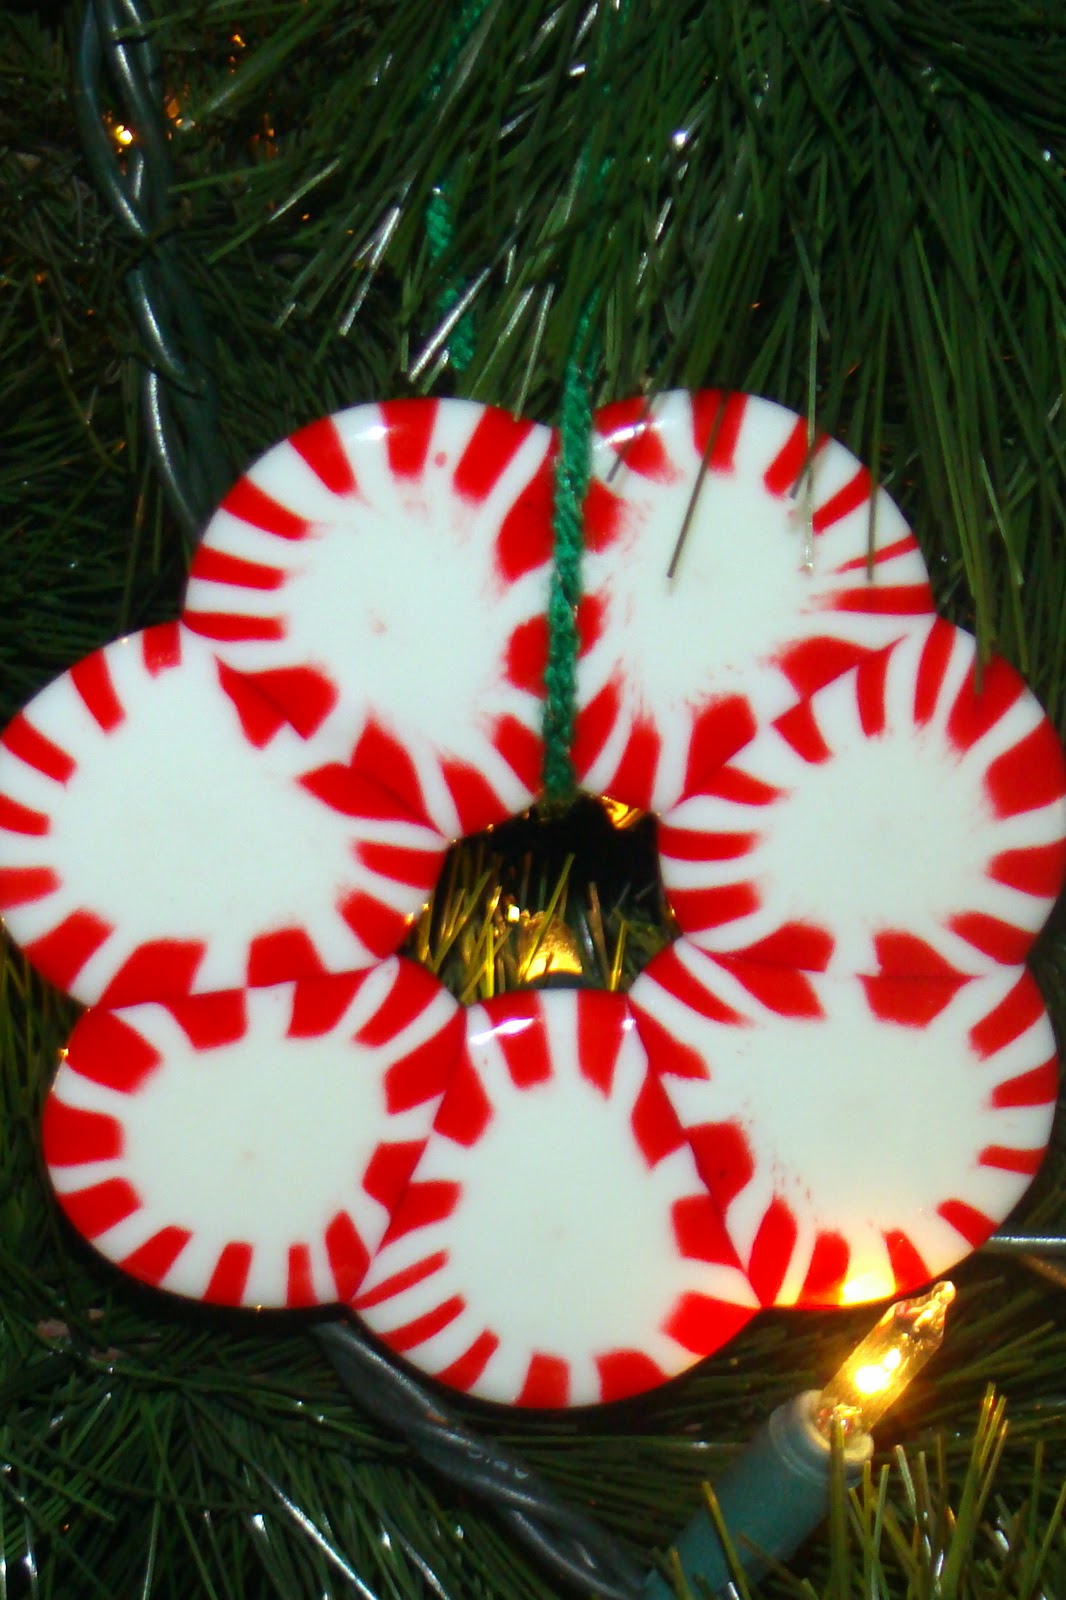 Sitting At Our Kitchen Table: Peppermint Candy Wreath